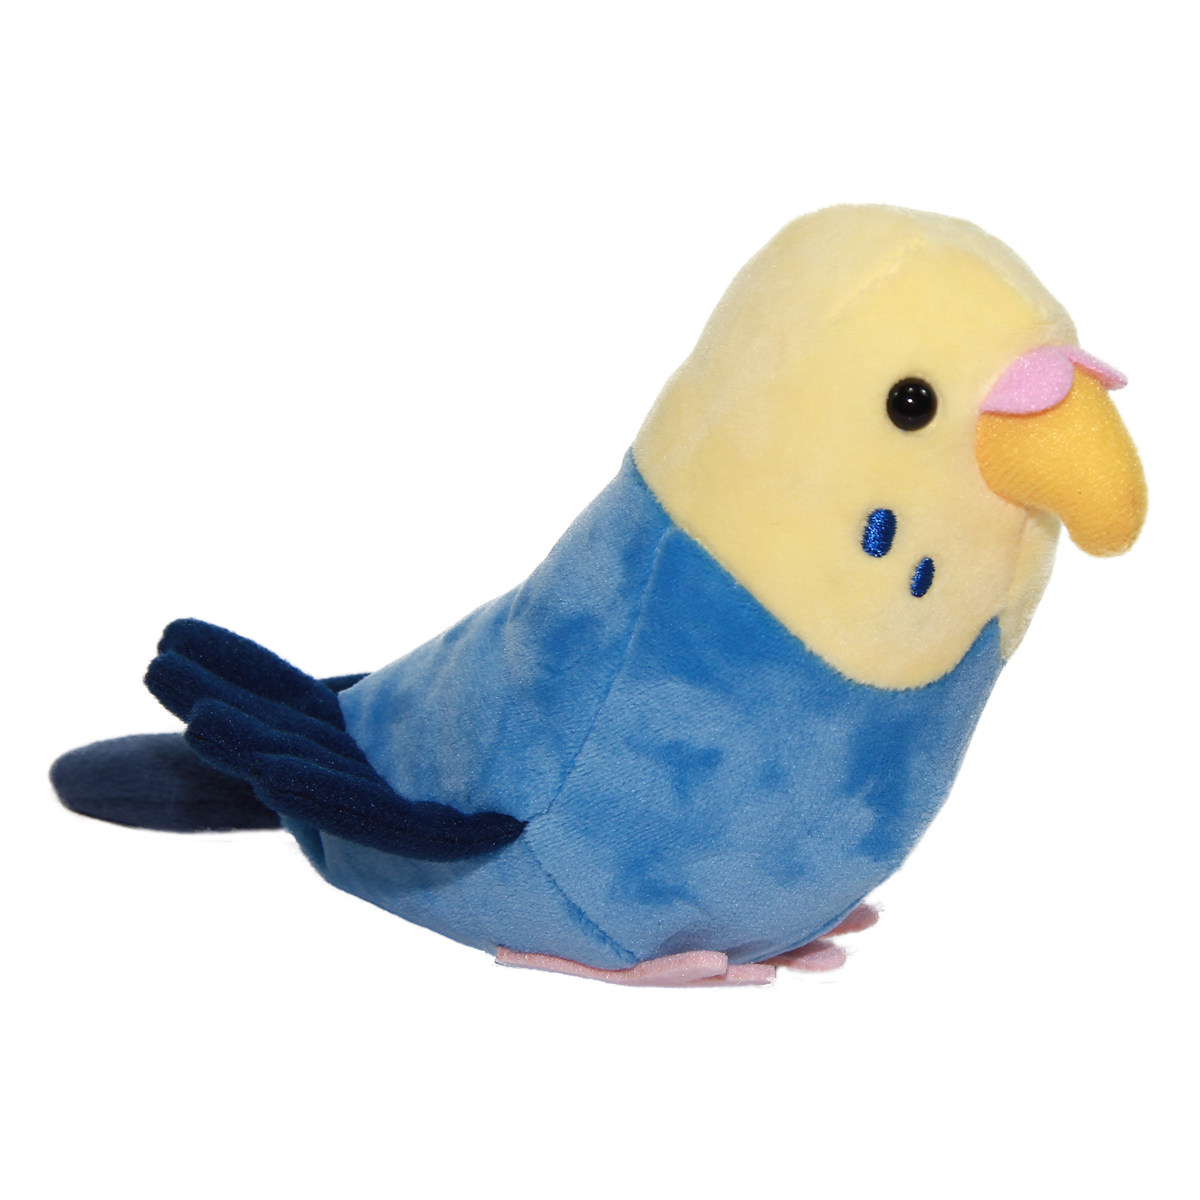 Parakeet Plush Doll, Cute Birds Collection, Stuffed Animal Toy, Blue & Yellow, 6 Inches